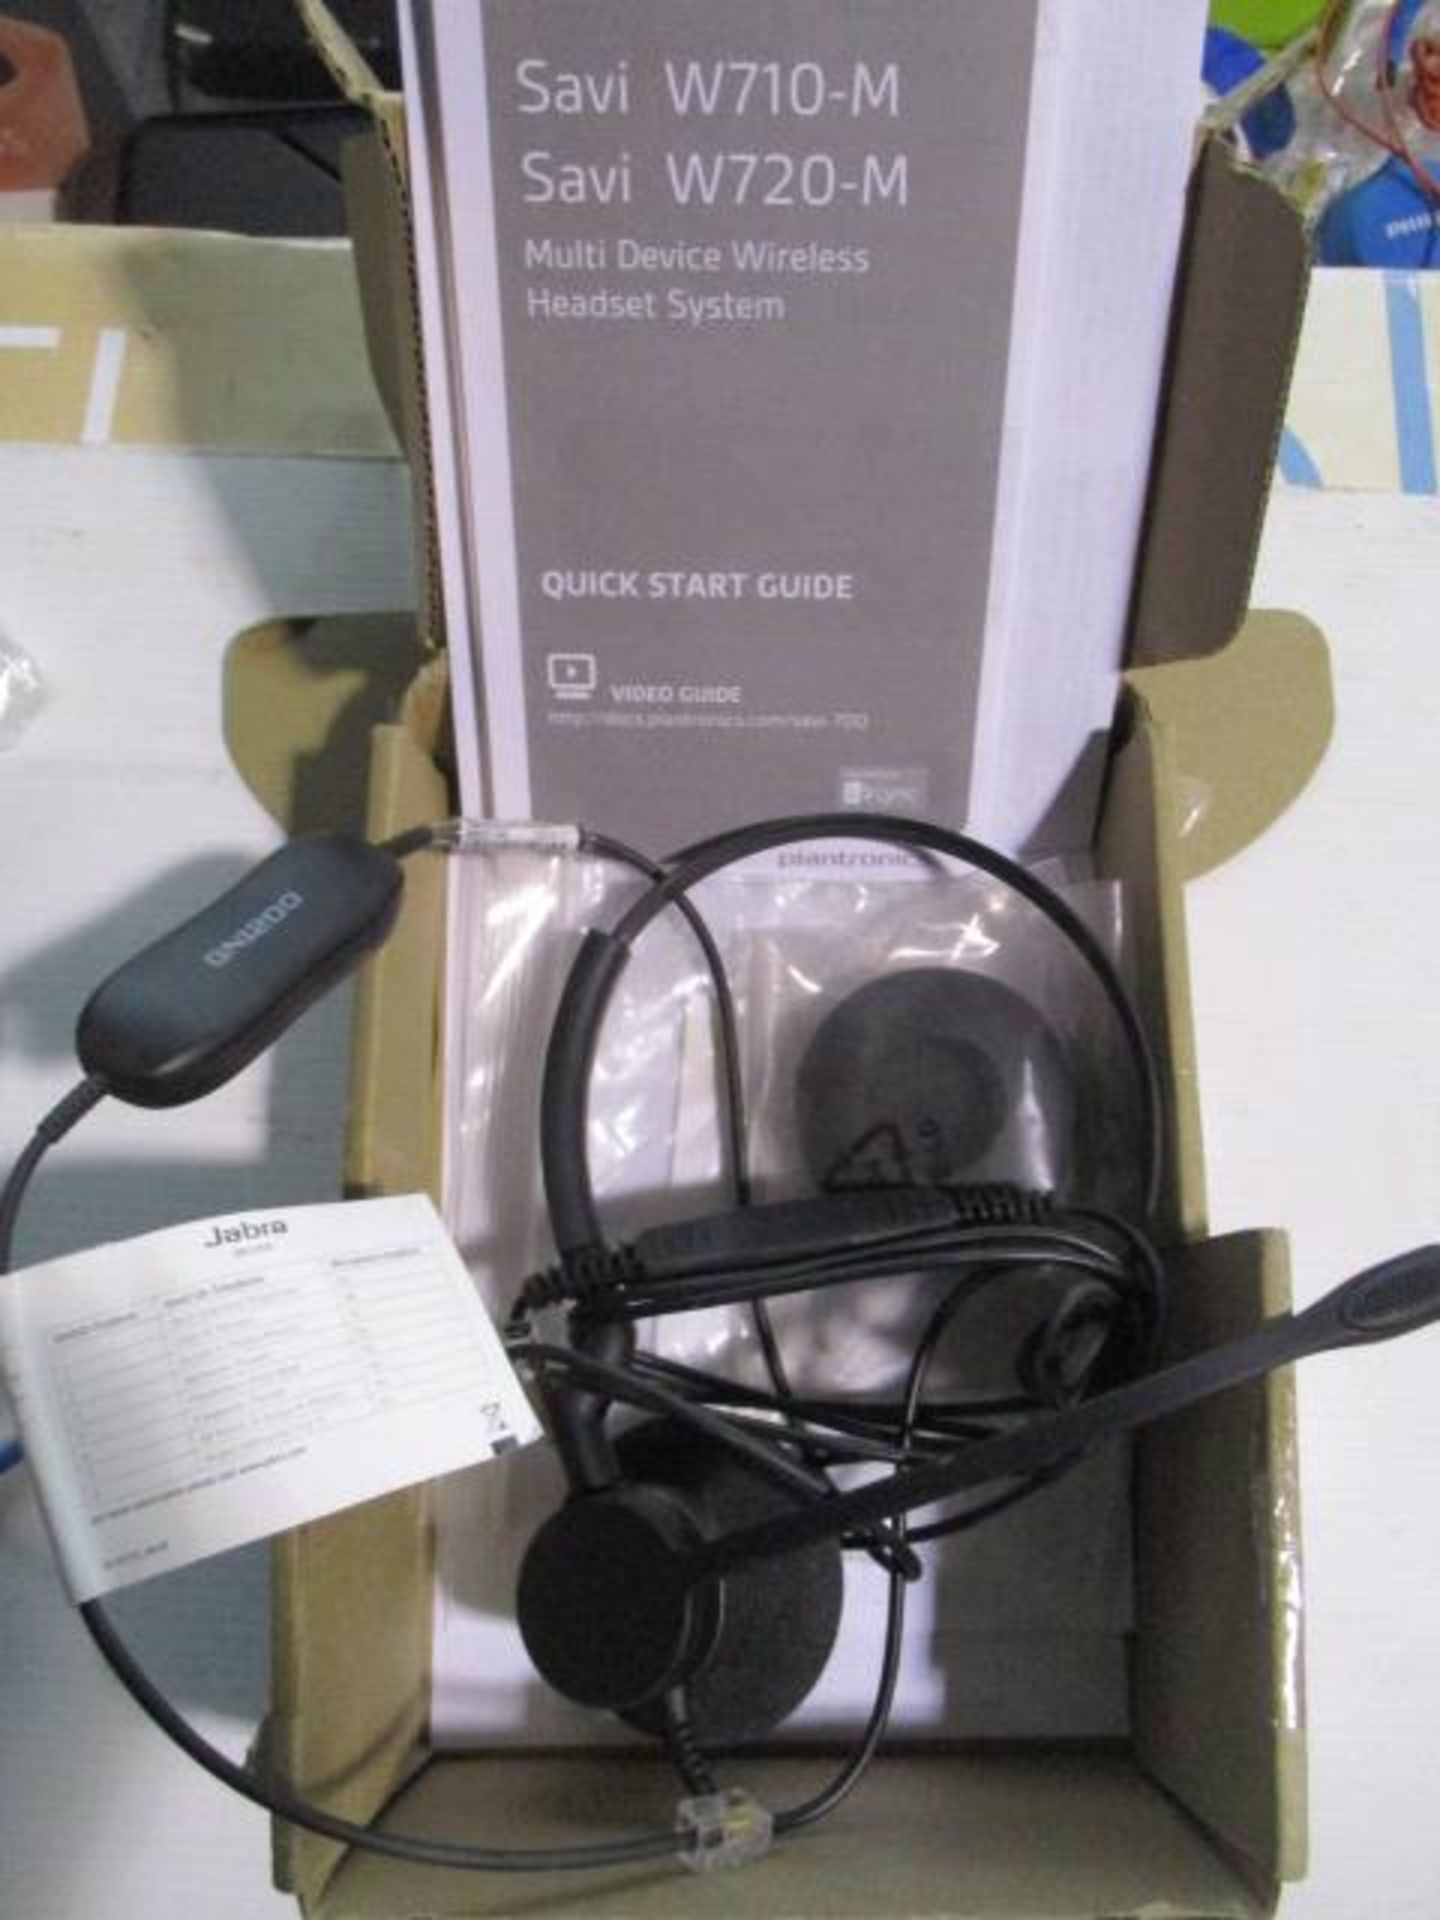 Jabra Headset as pictured